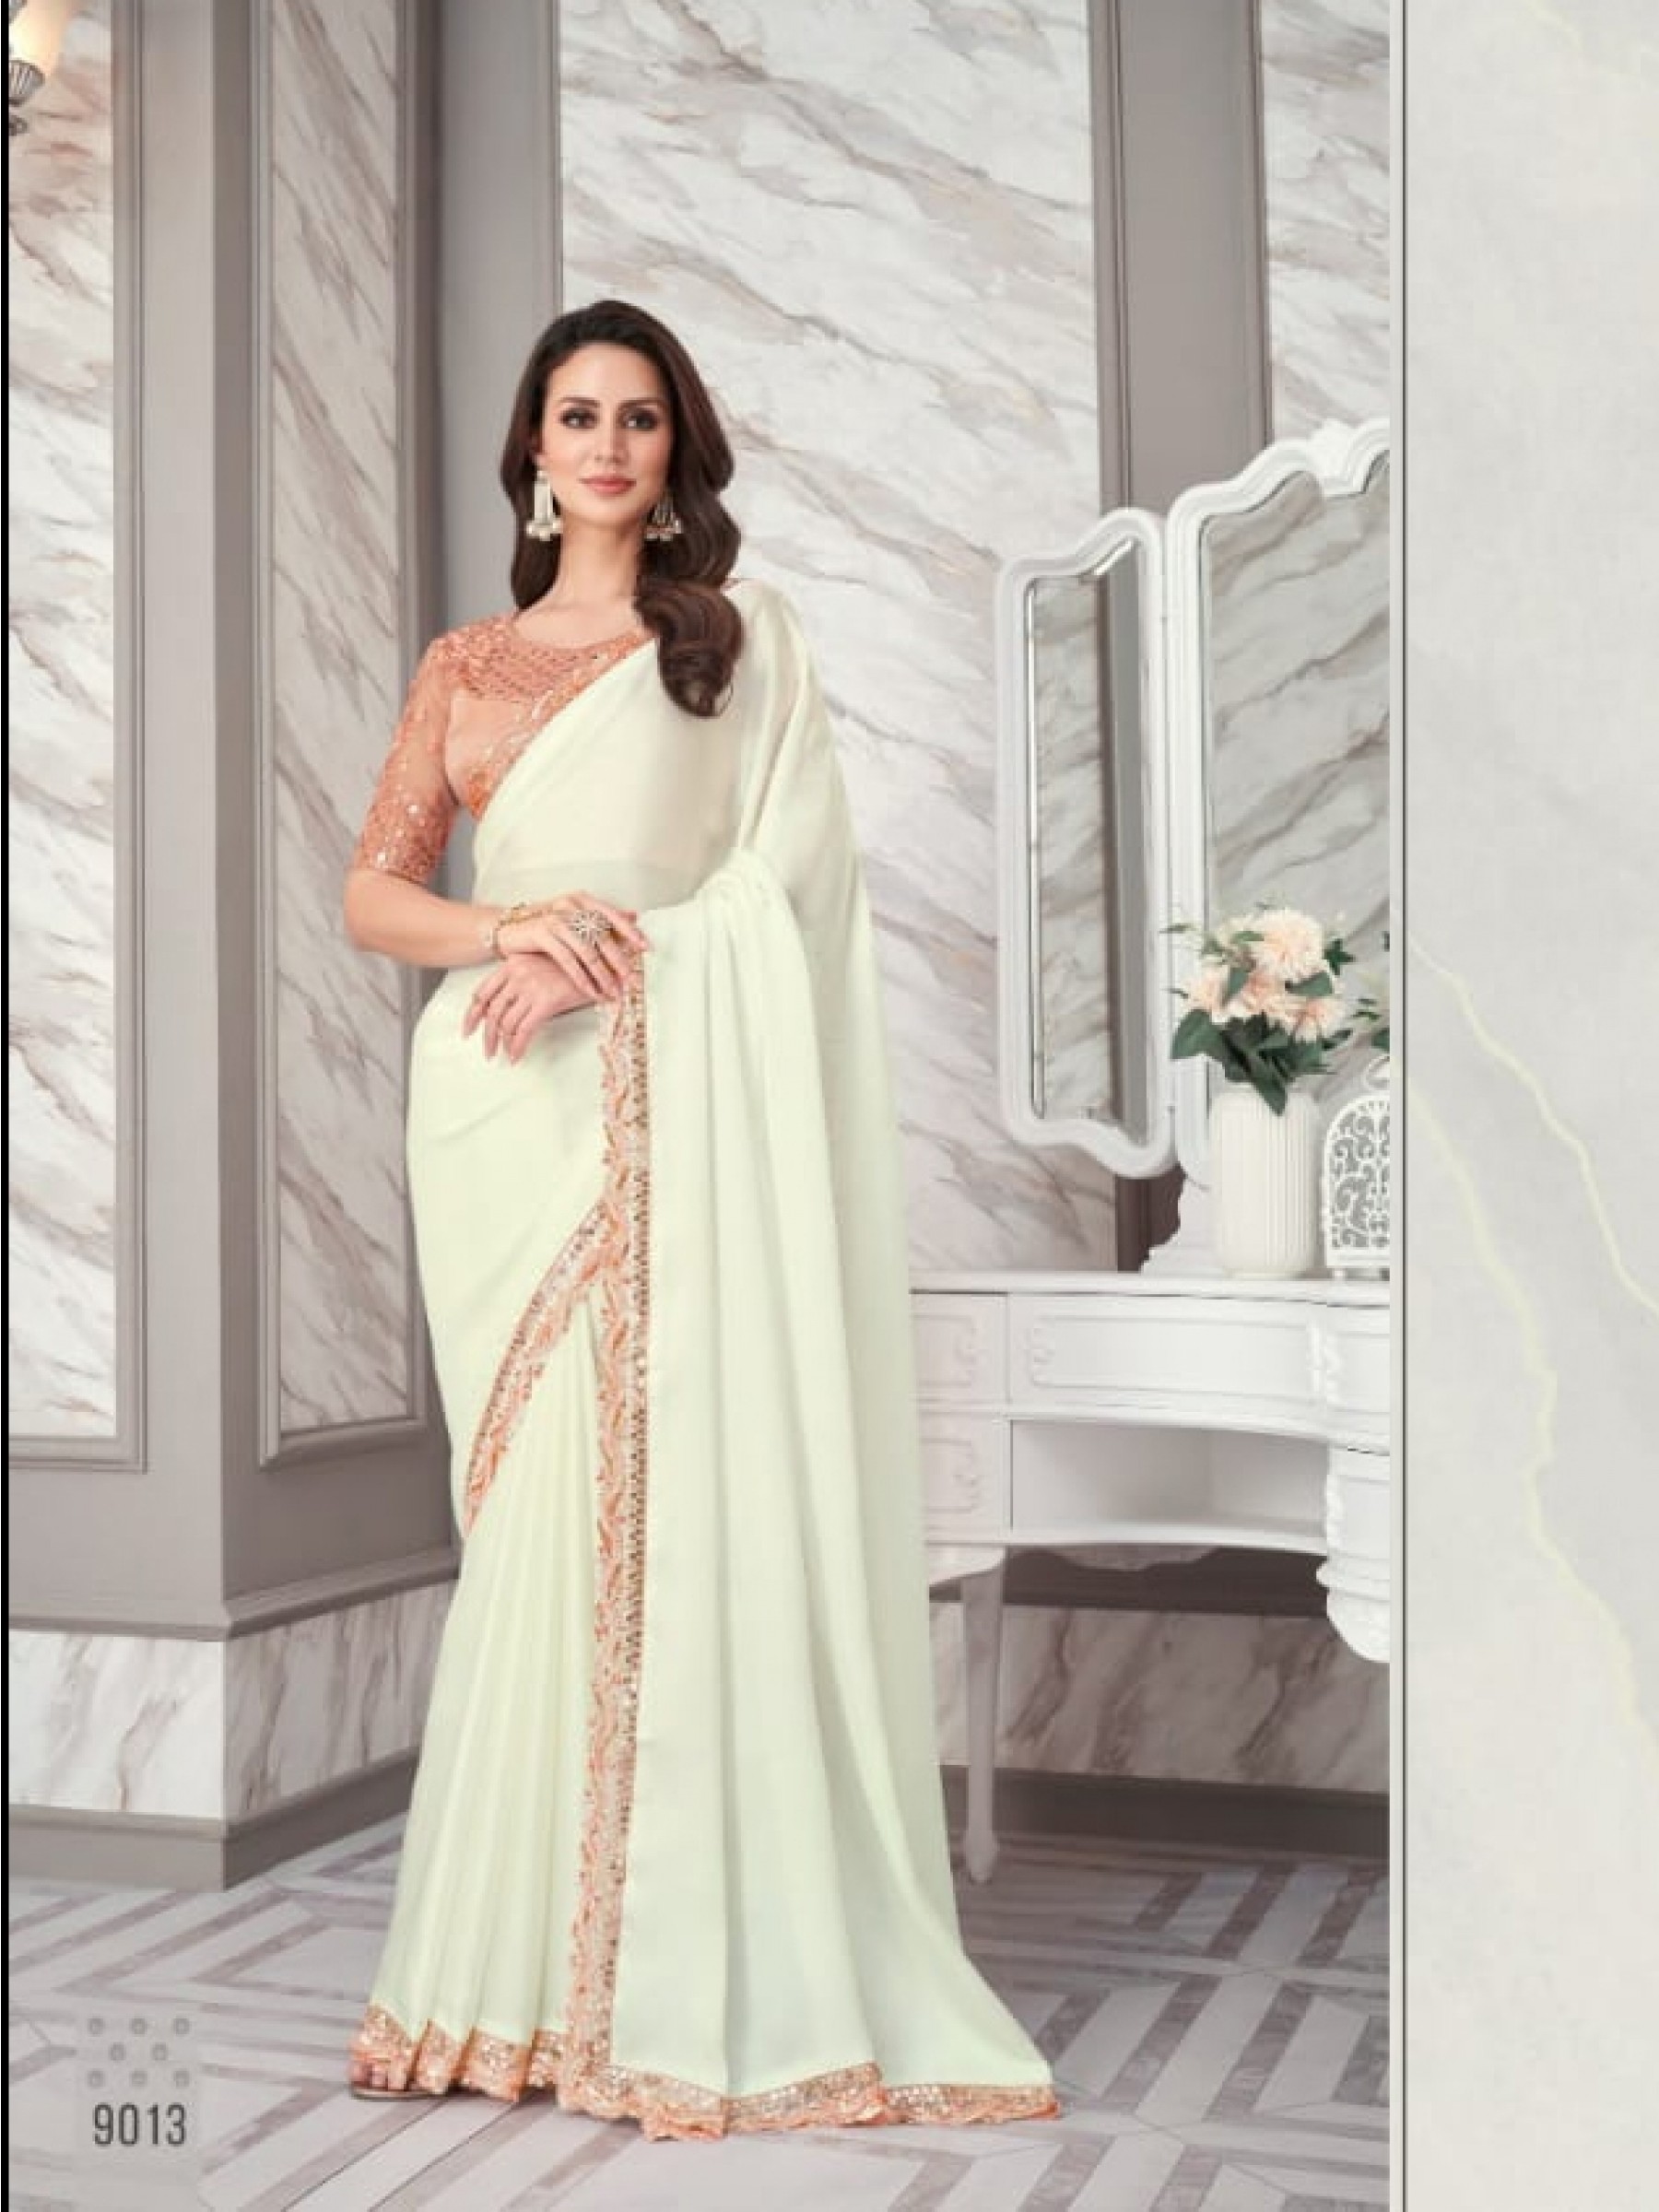 Sateen Silk Party Wear  Saree In White Color With Embroidery Work